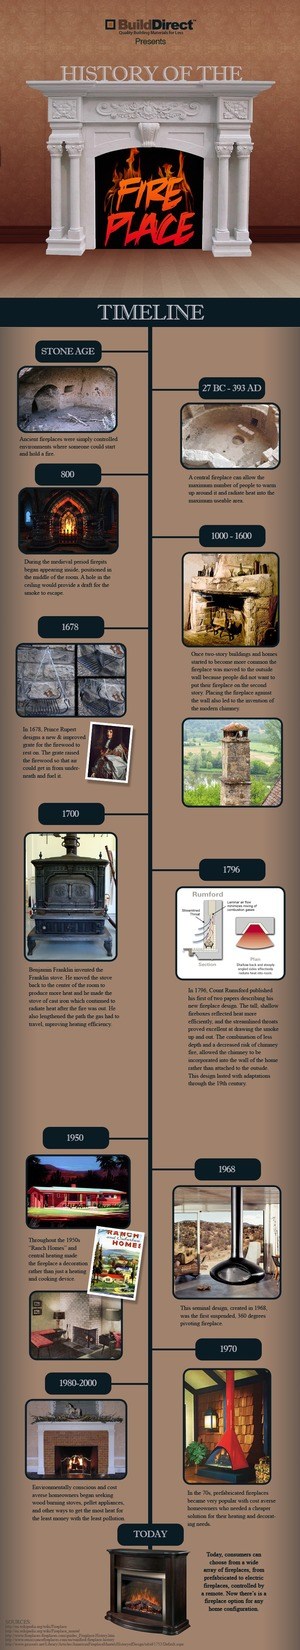 History of the Fireplace